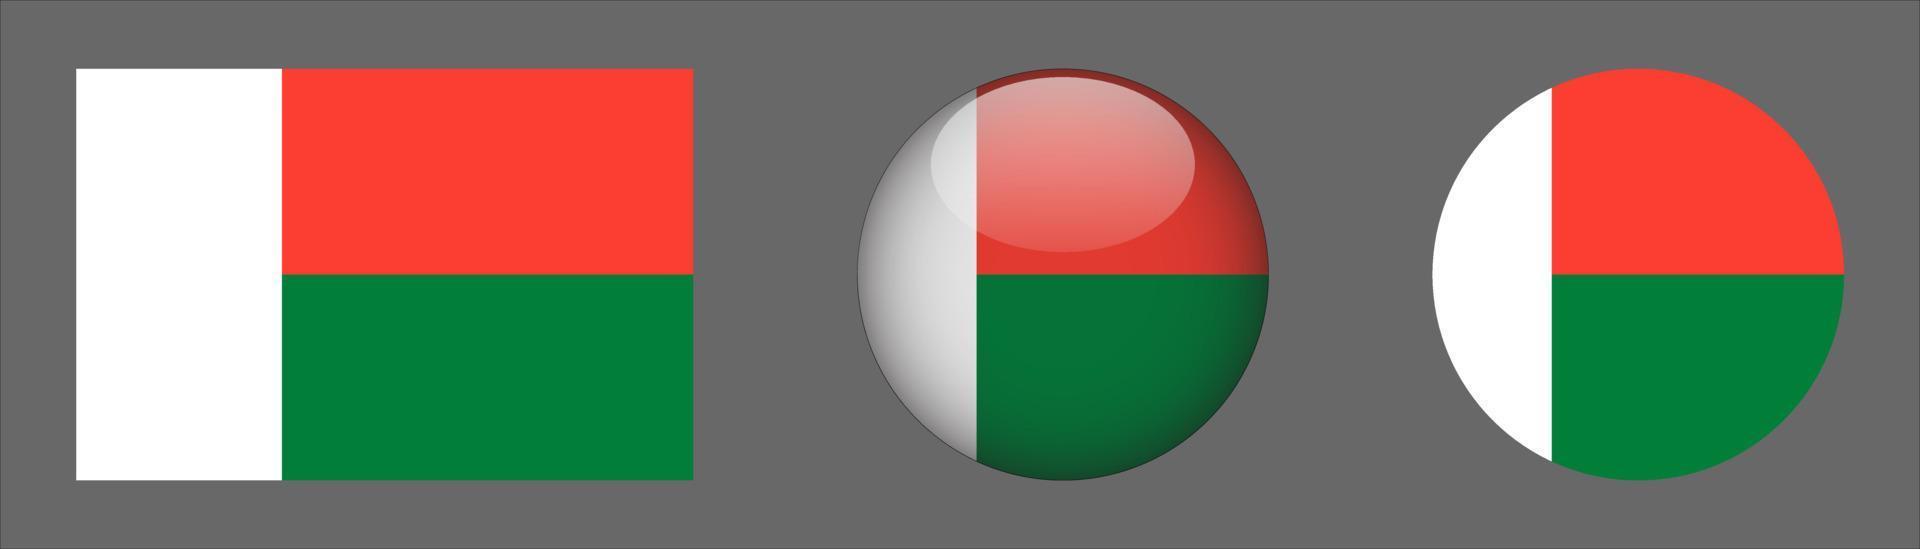 Madagascar Flag Set Collection, Original Size Ratio, 3D Rounded and Flat Rounded. vector